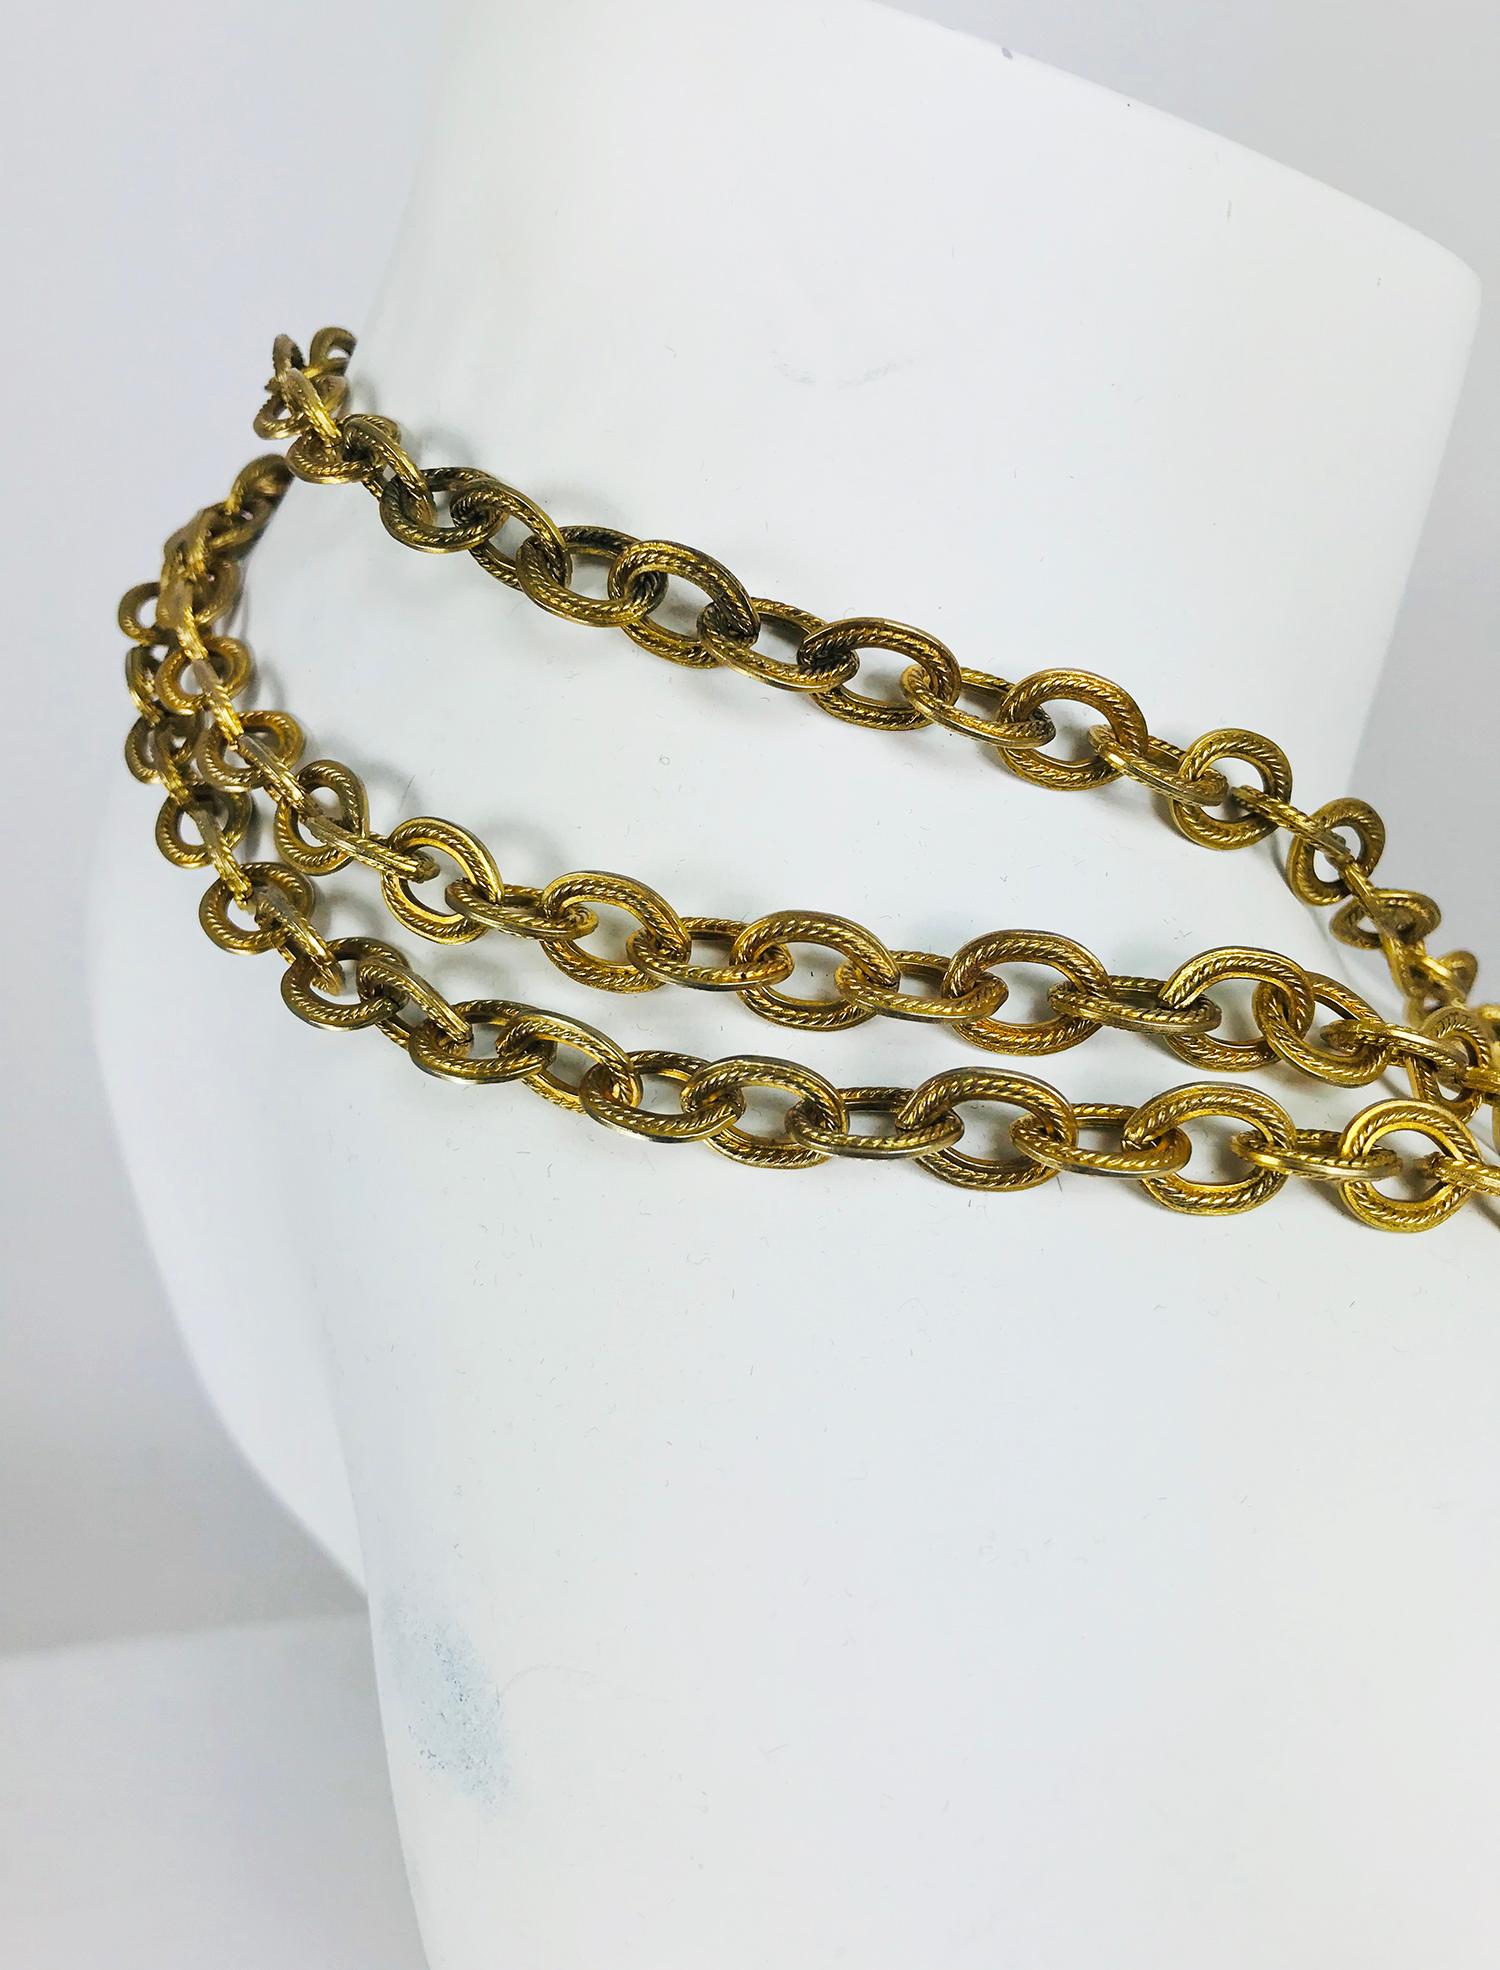 Women's or Men's Snake Festoon Necklace in faux Gold and Rhinestone Vintage